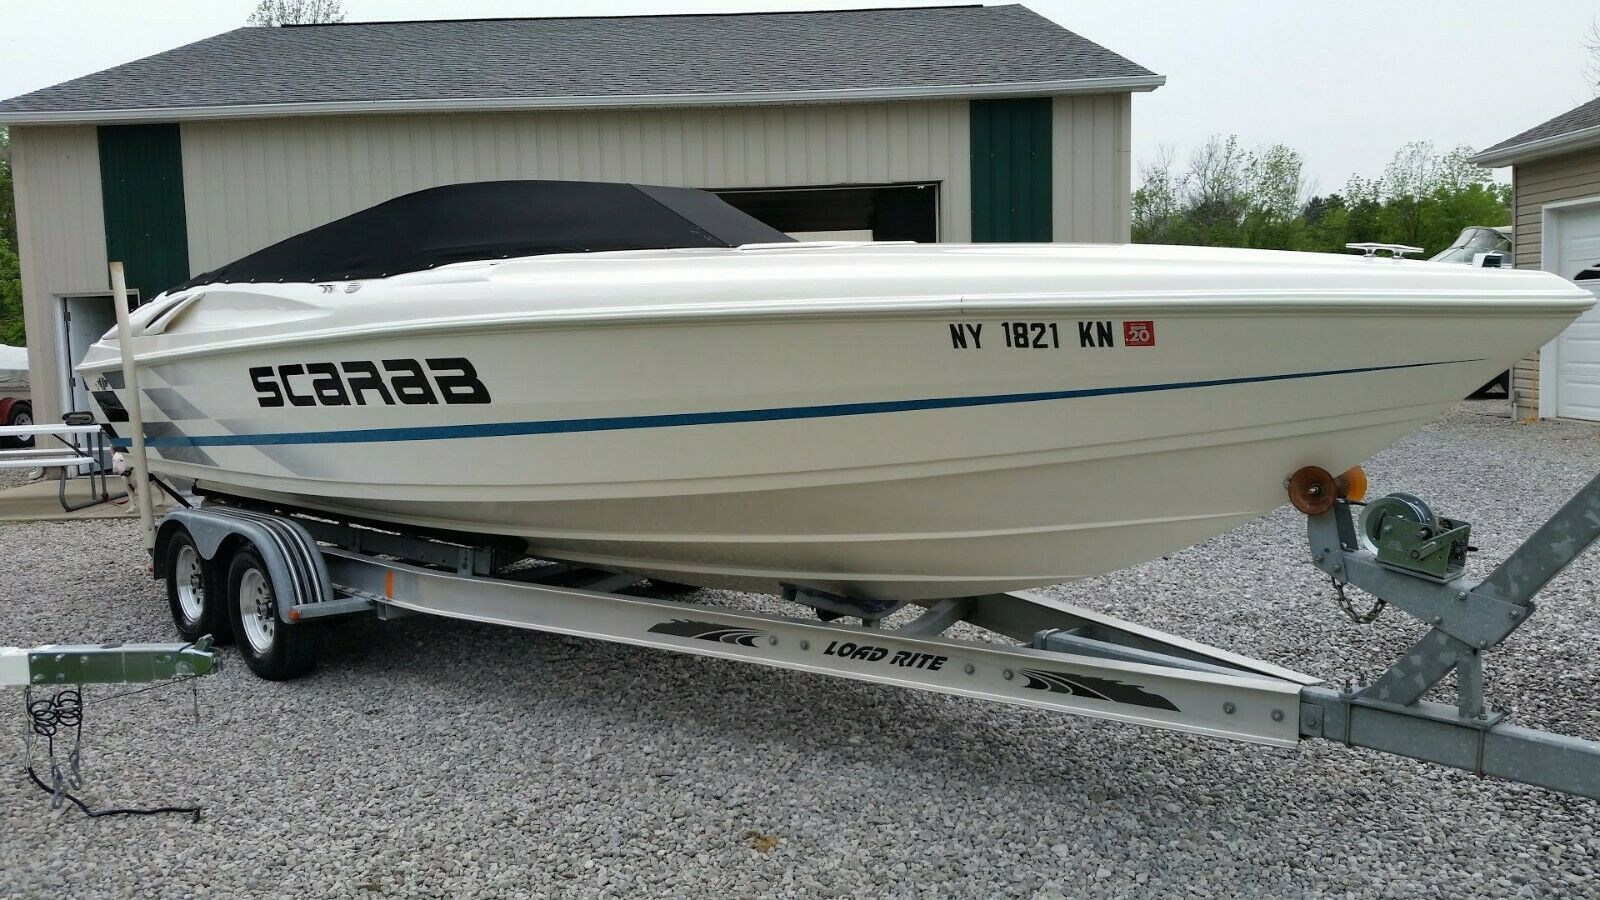 1998 27ft welcraft scarab boat and load rite trailer